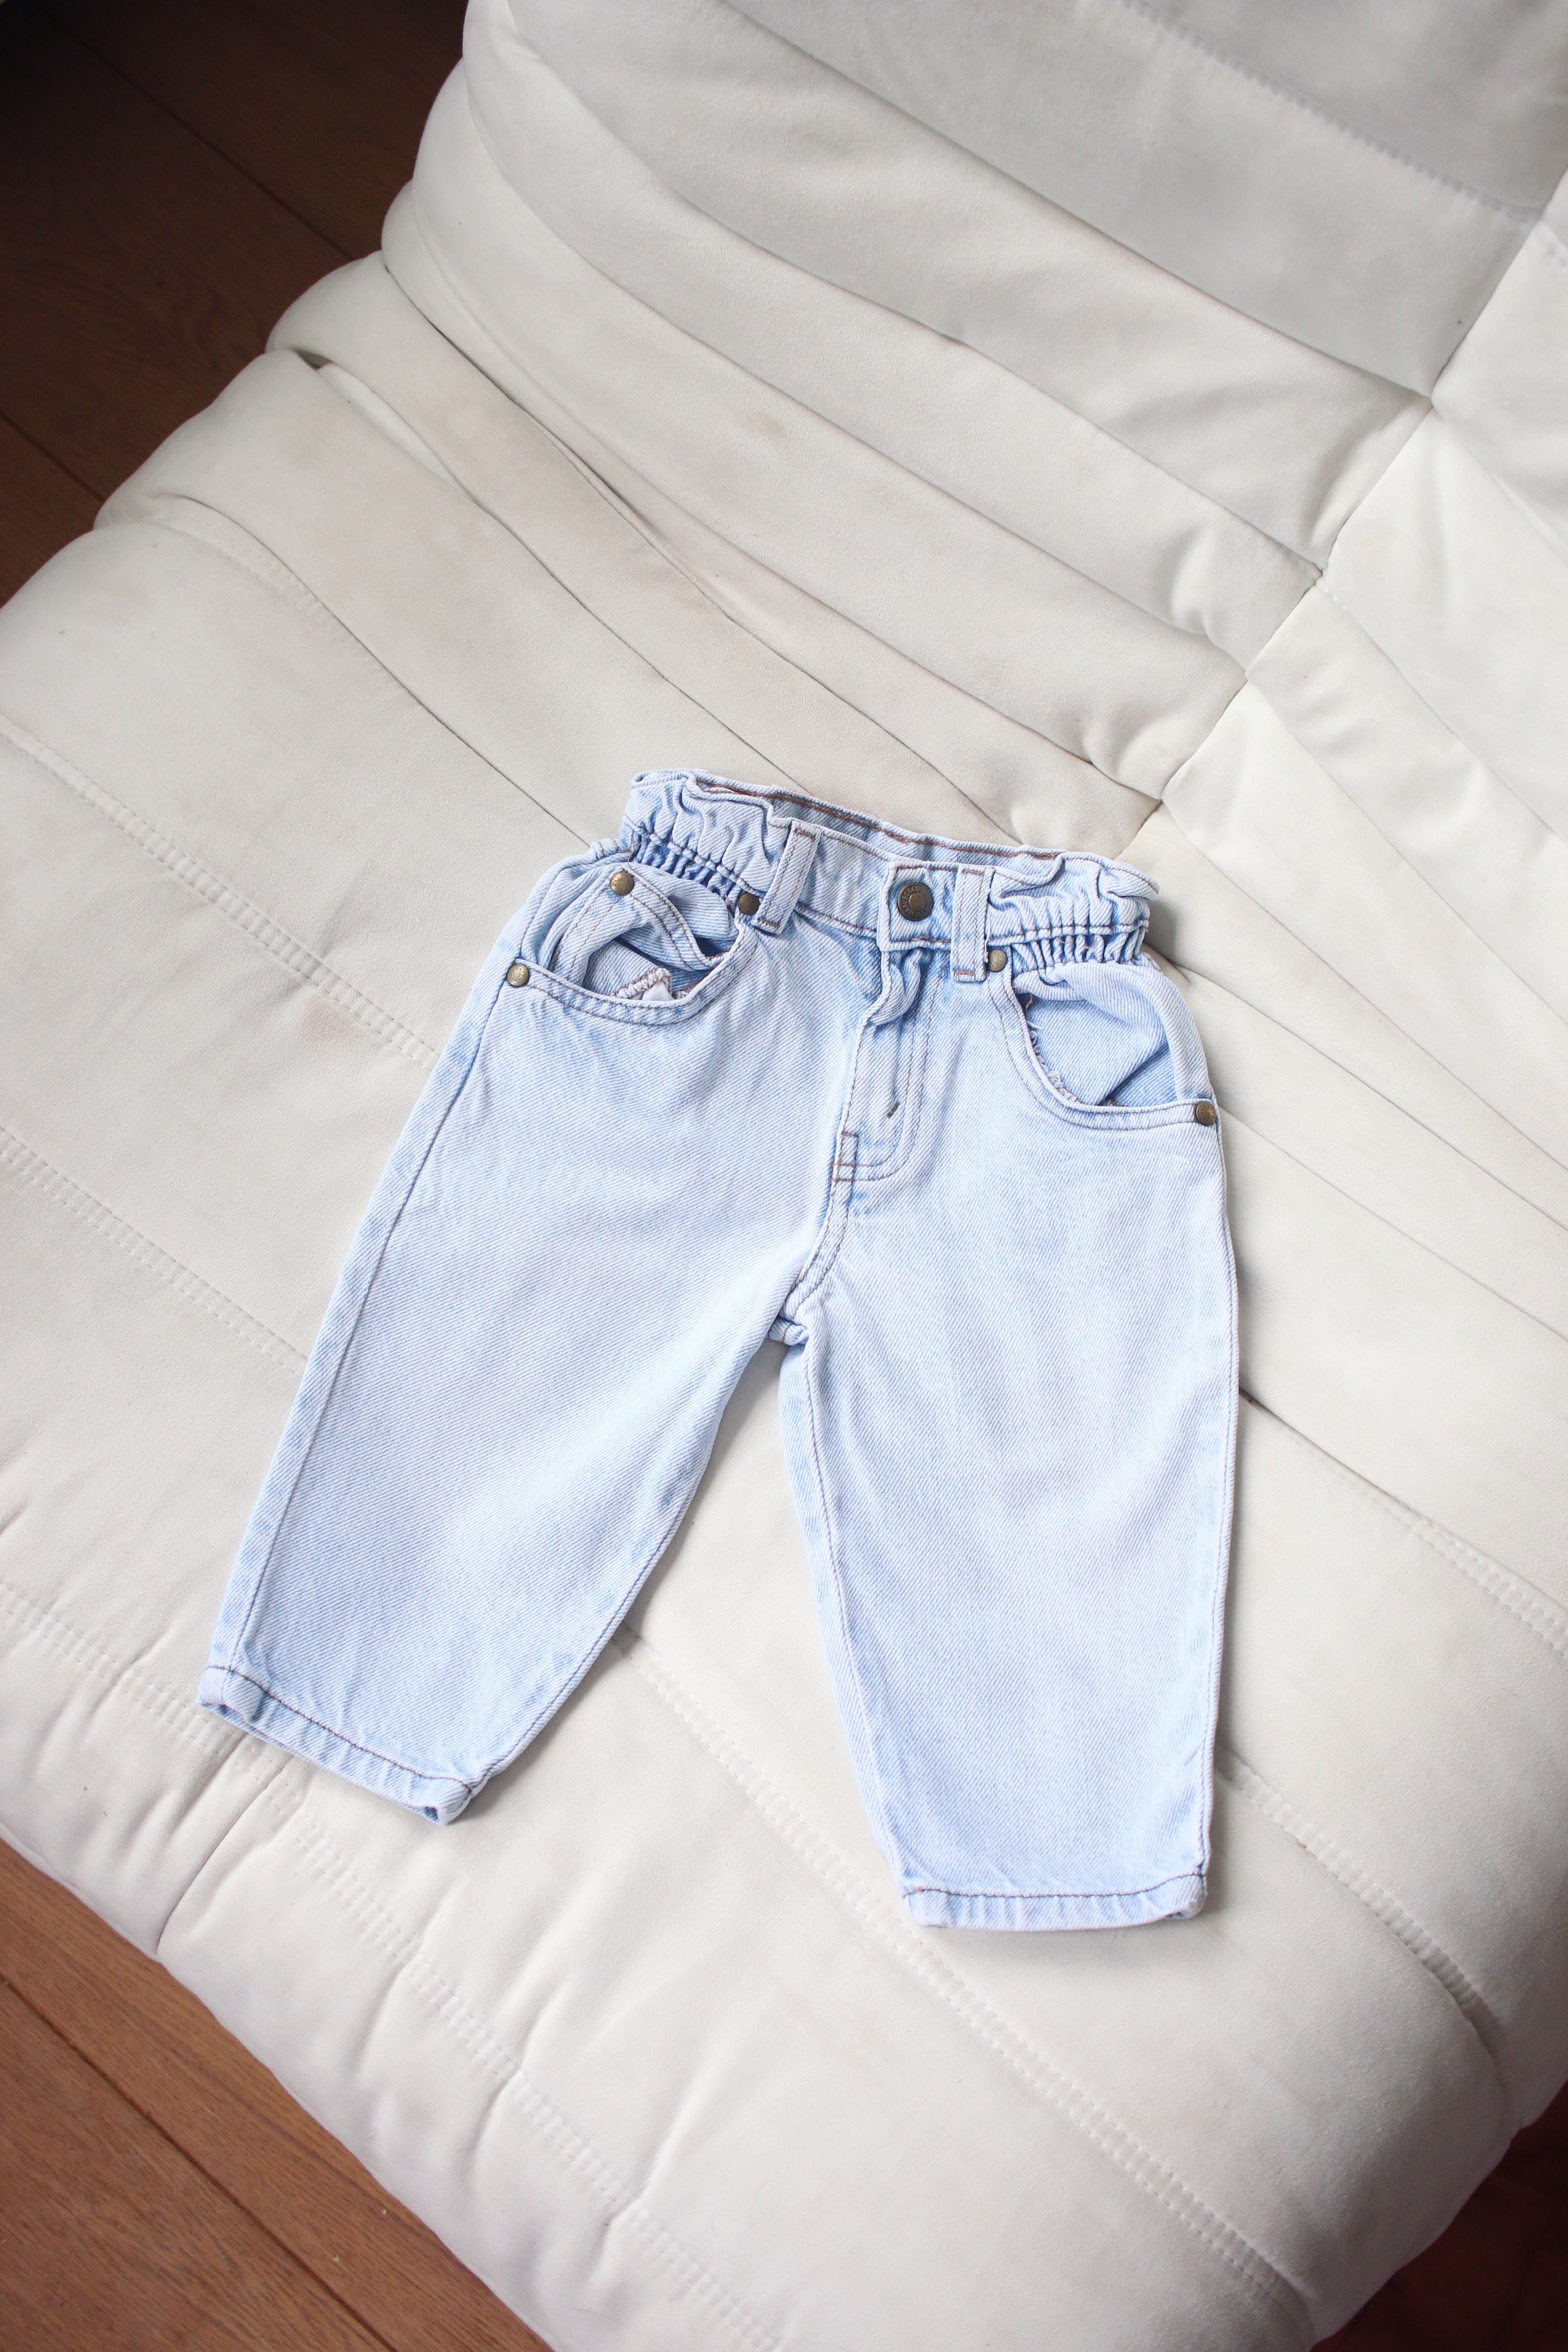 FOR AUCTION WINNER - Vintage Levi's pink tab jeans - size 12-18 months - Made in Guatamala